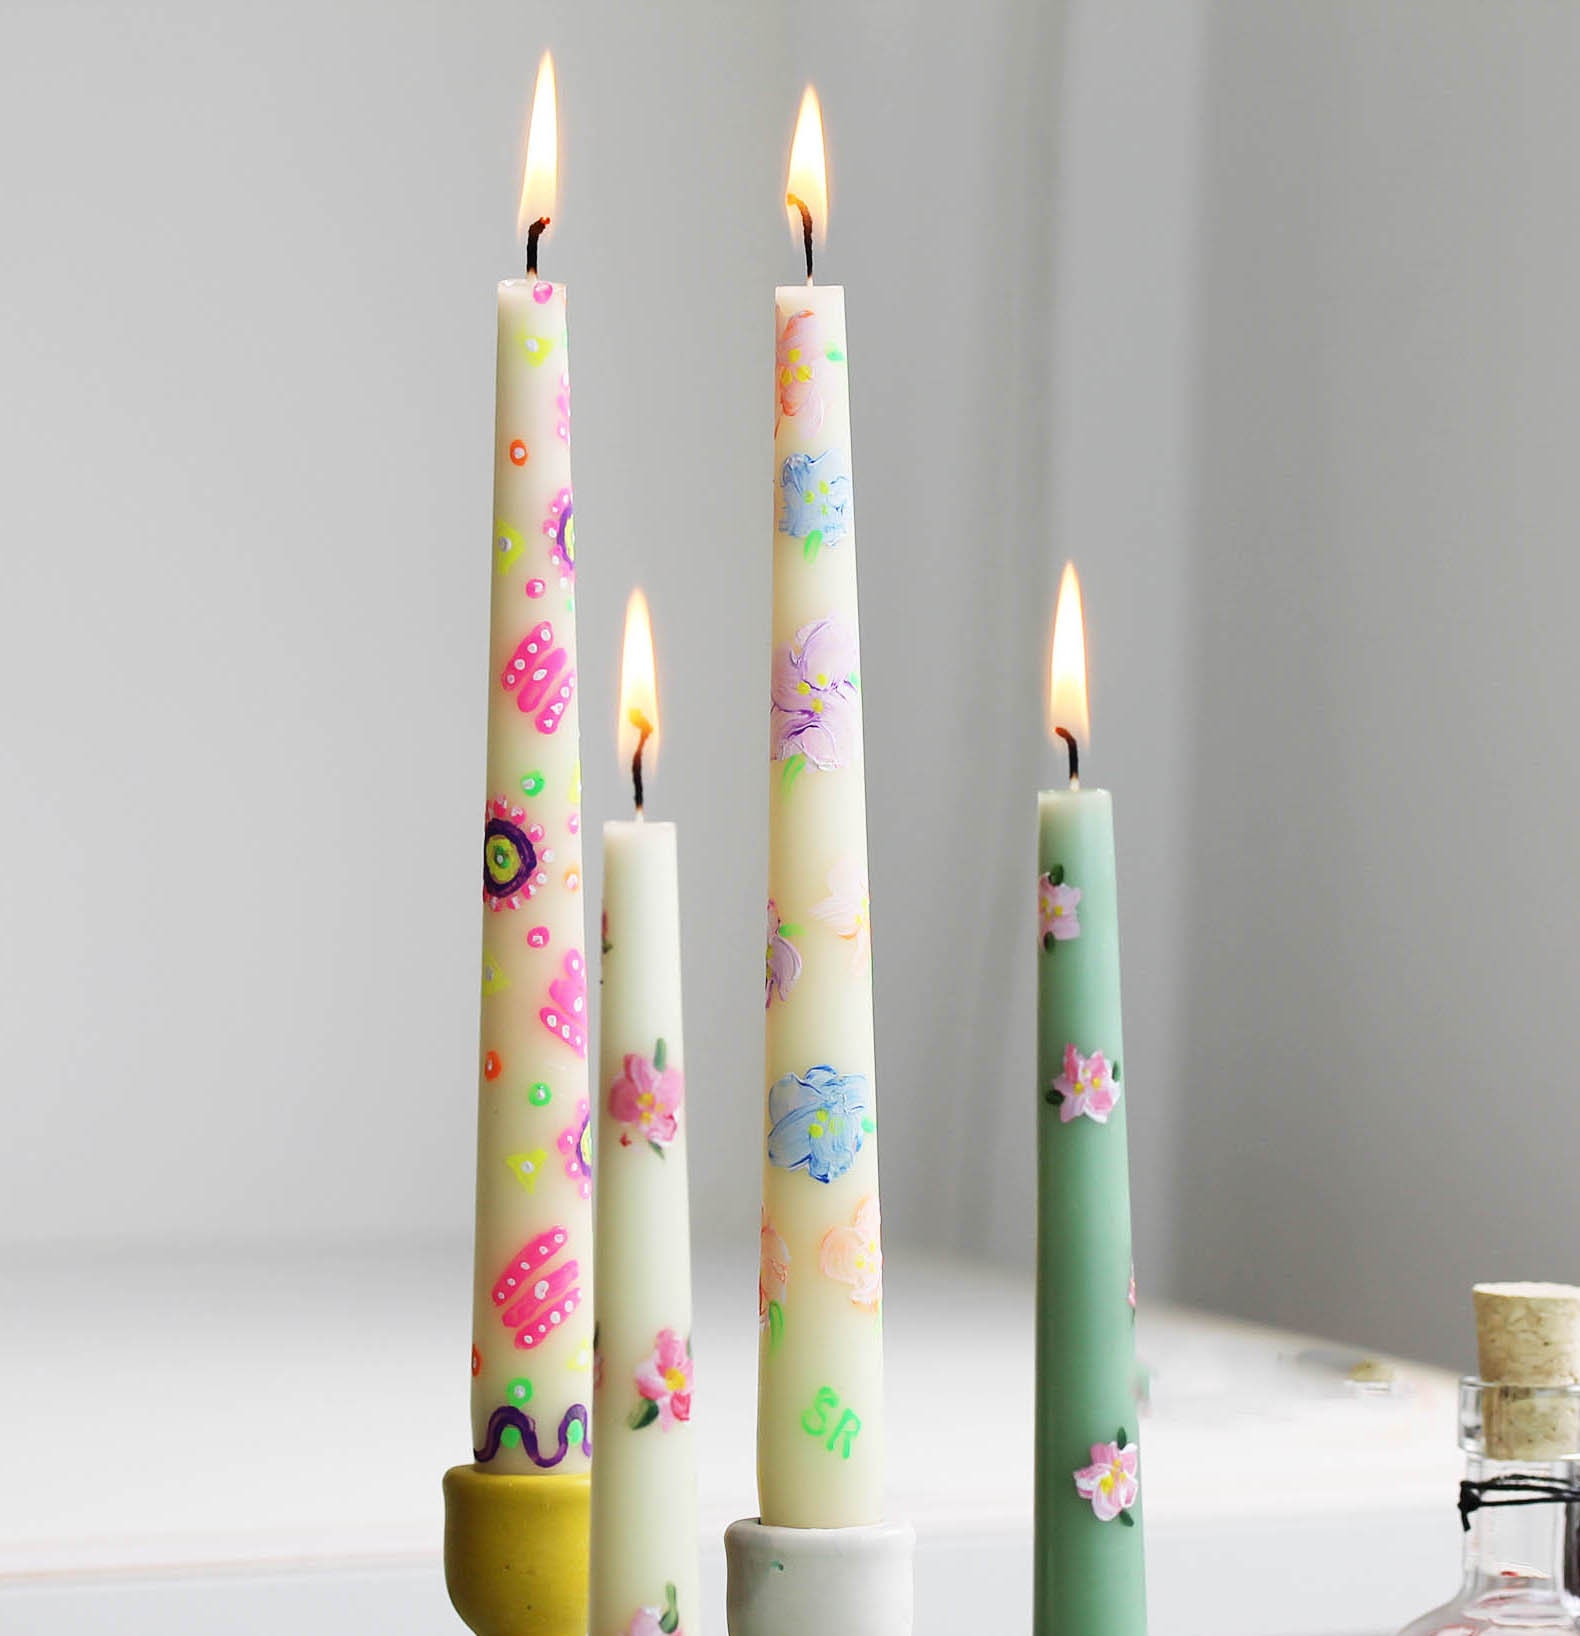 DIY Candle Painting Kit — Crushes